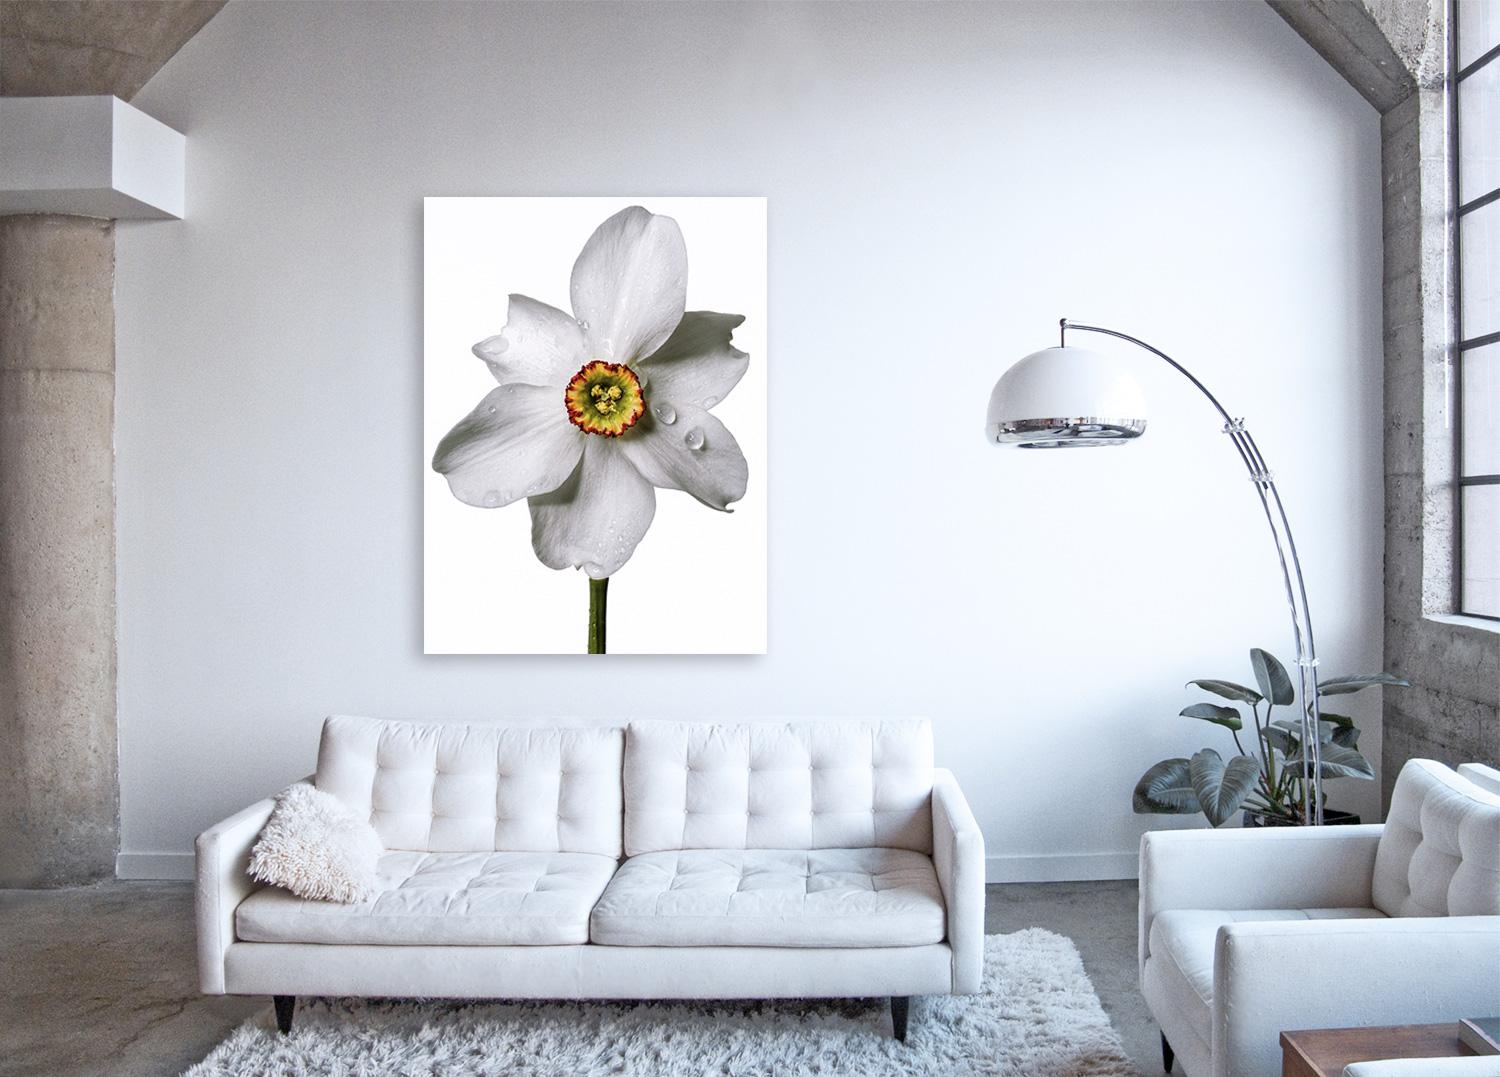 Flora Italiana (Narcissus Poetic) - large format botanical still life photograph - Photograph by Linda Rosewall